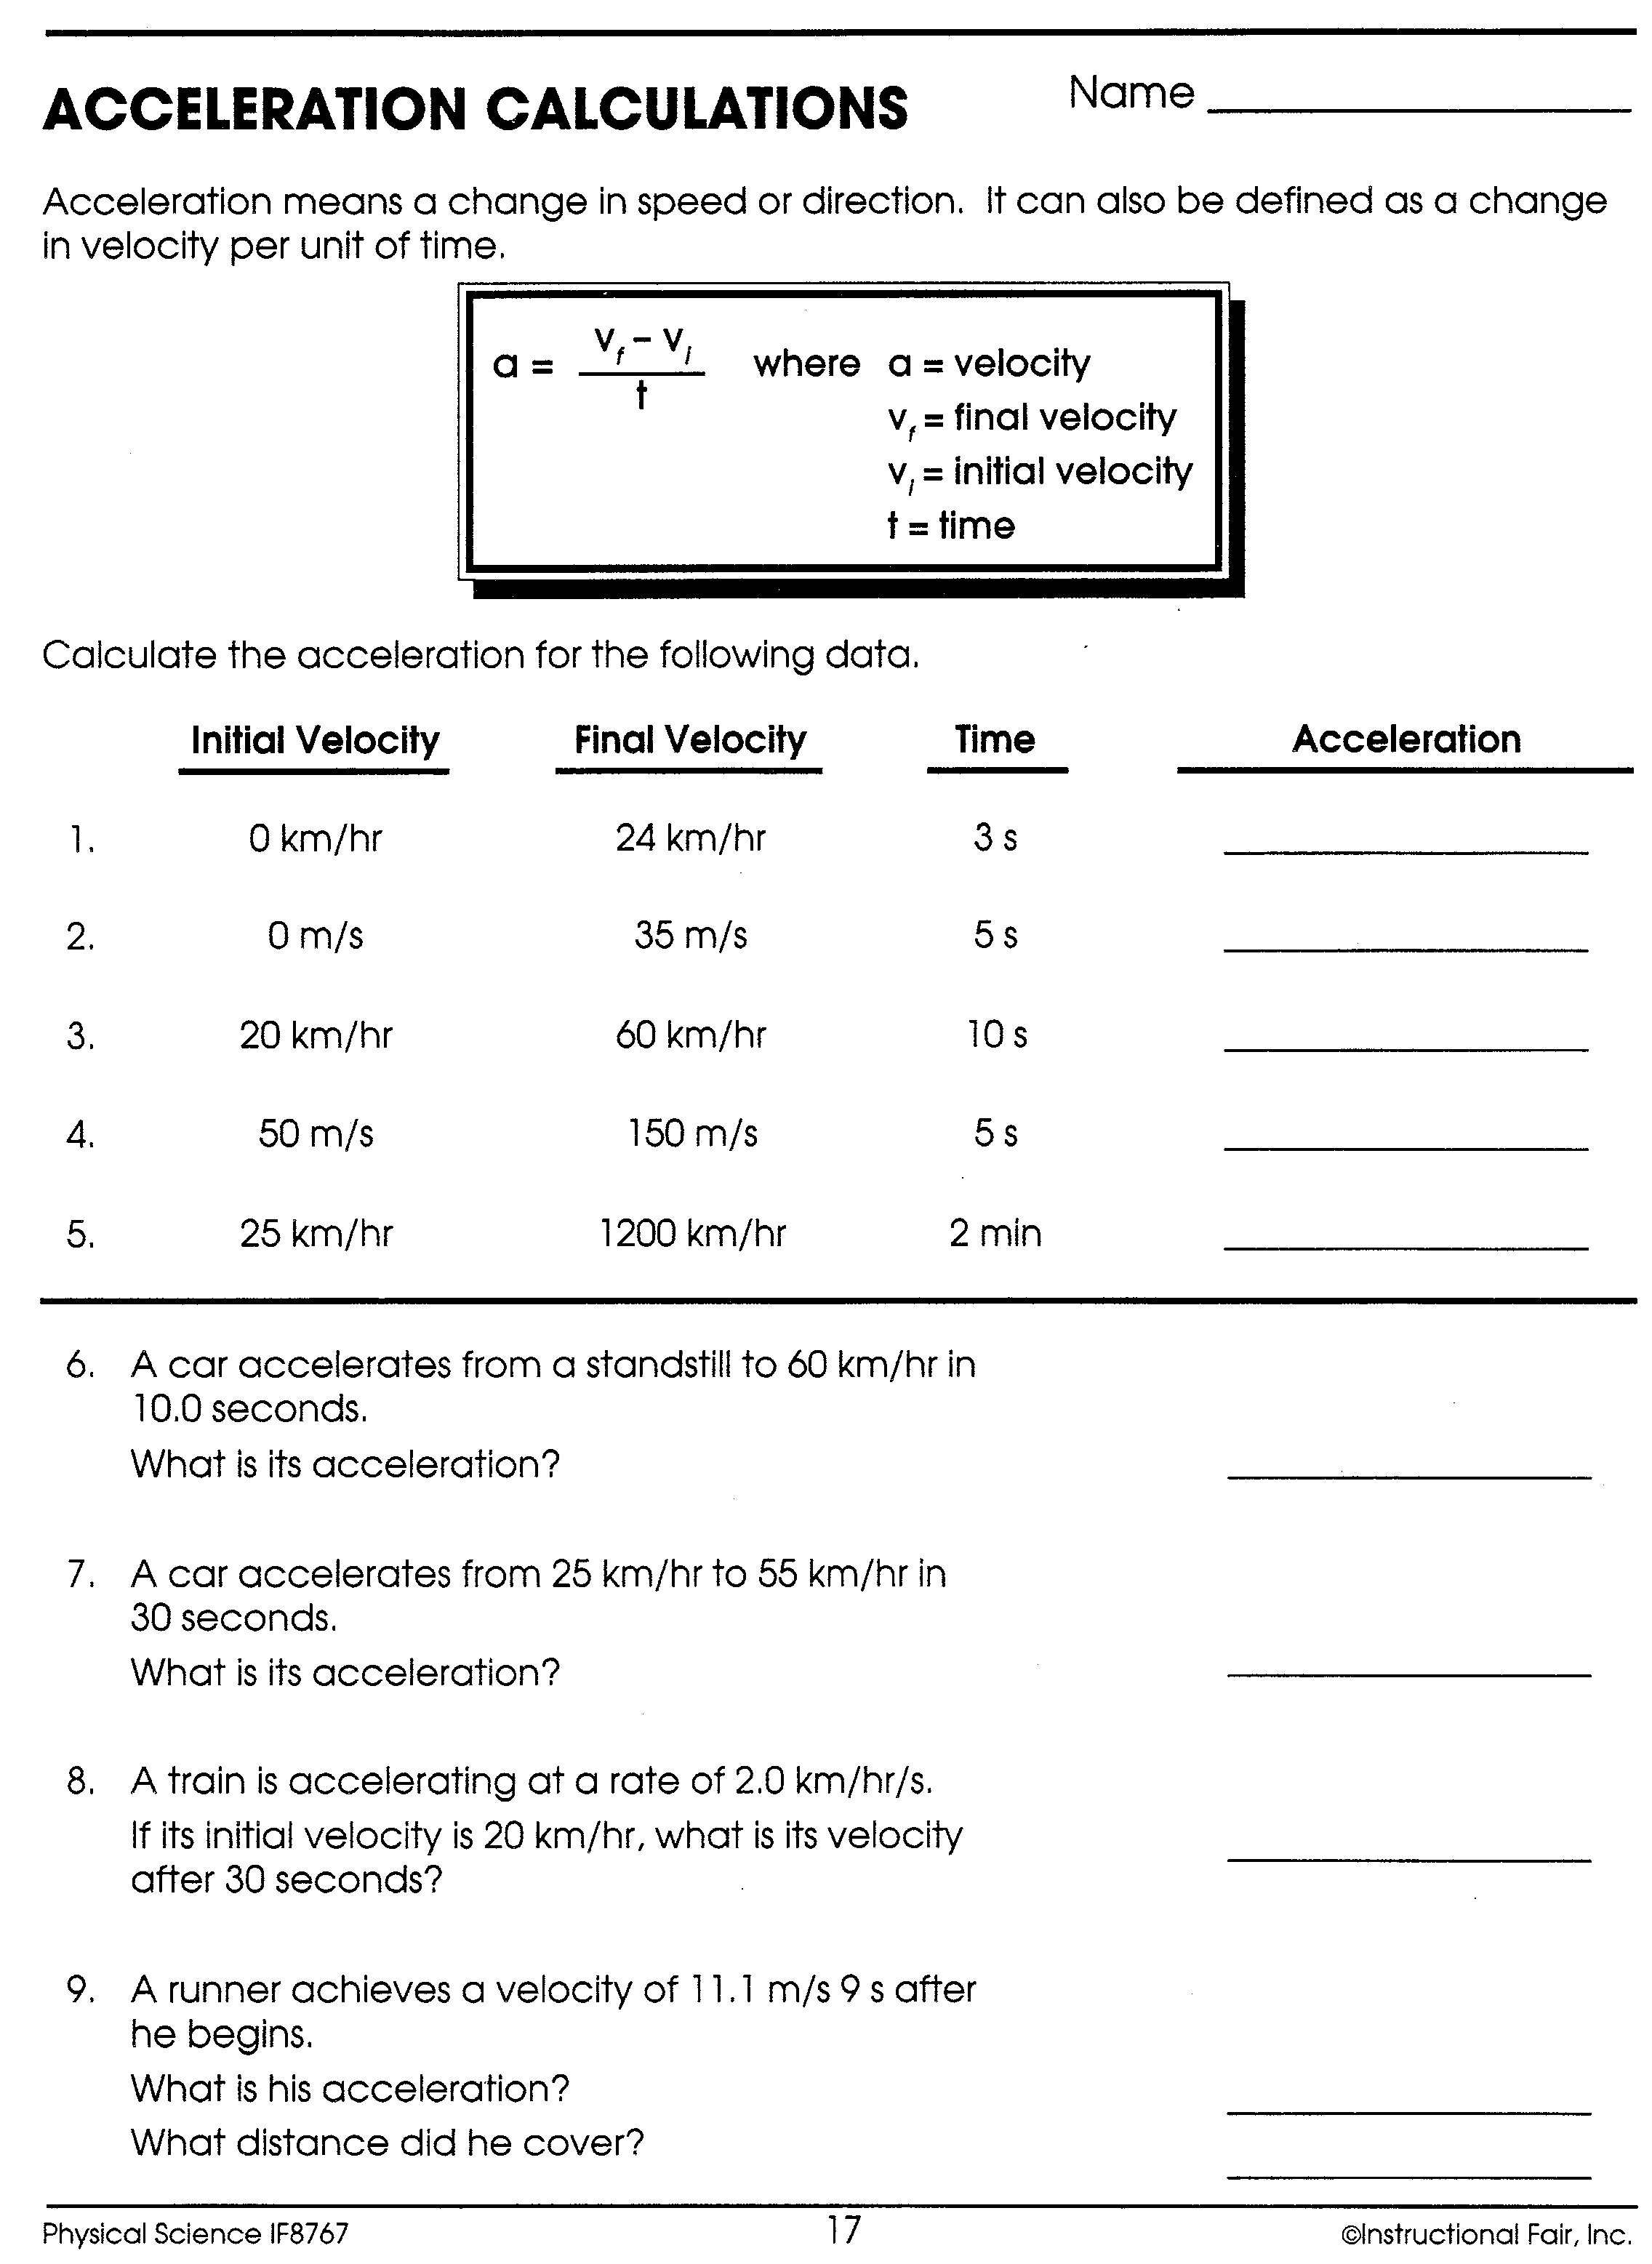 calculating-acceleration-worksheet-with-answers